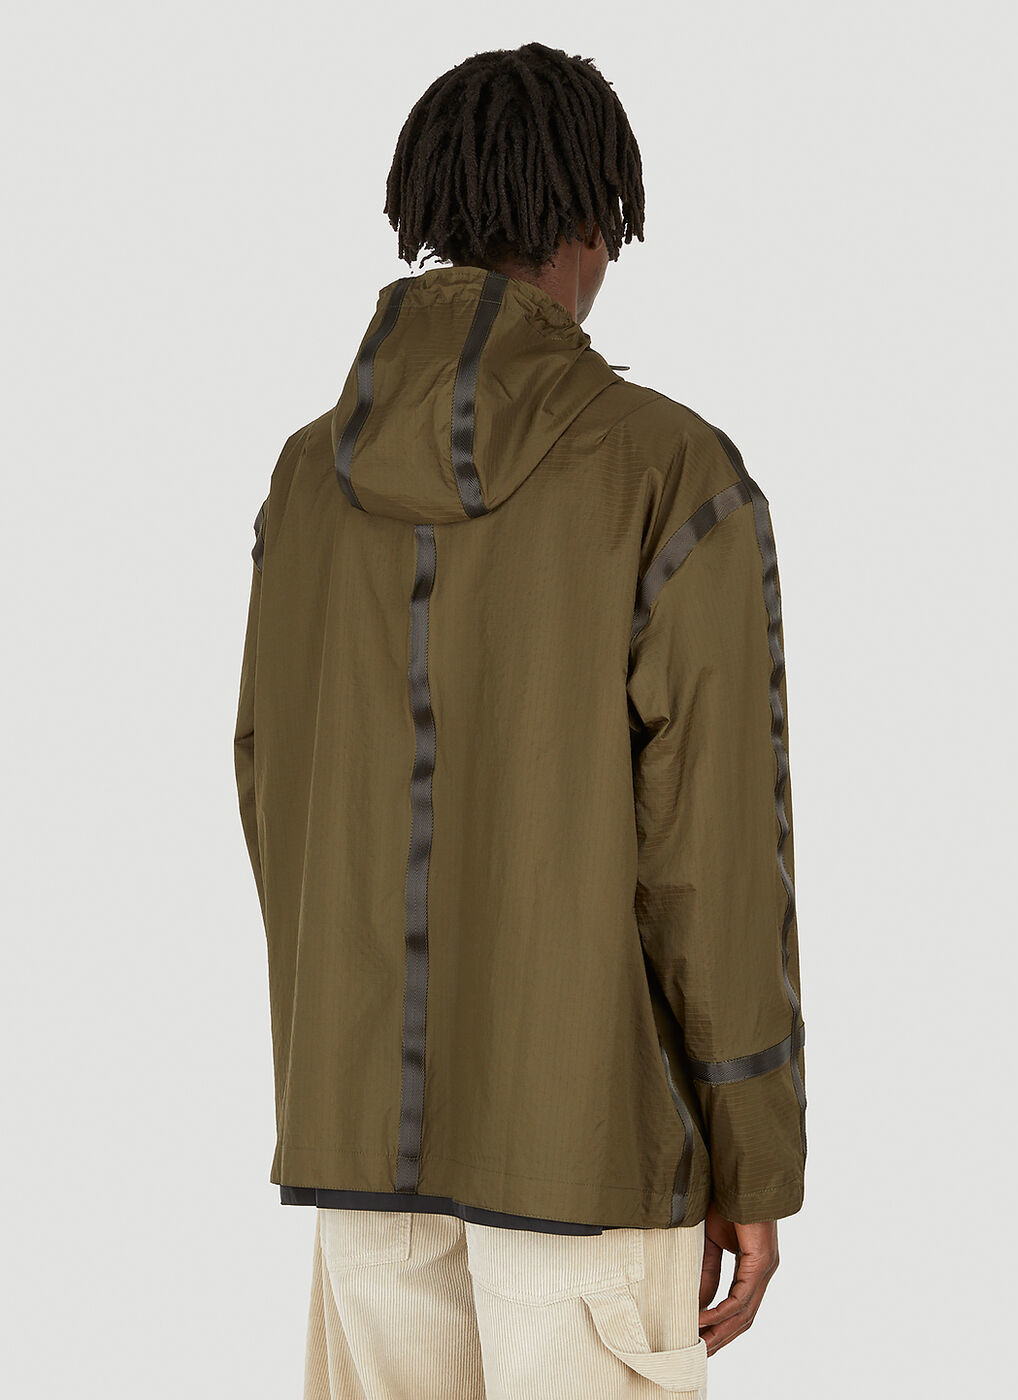 Introspect Army Jacket in Khaki Our Legacy